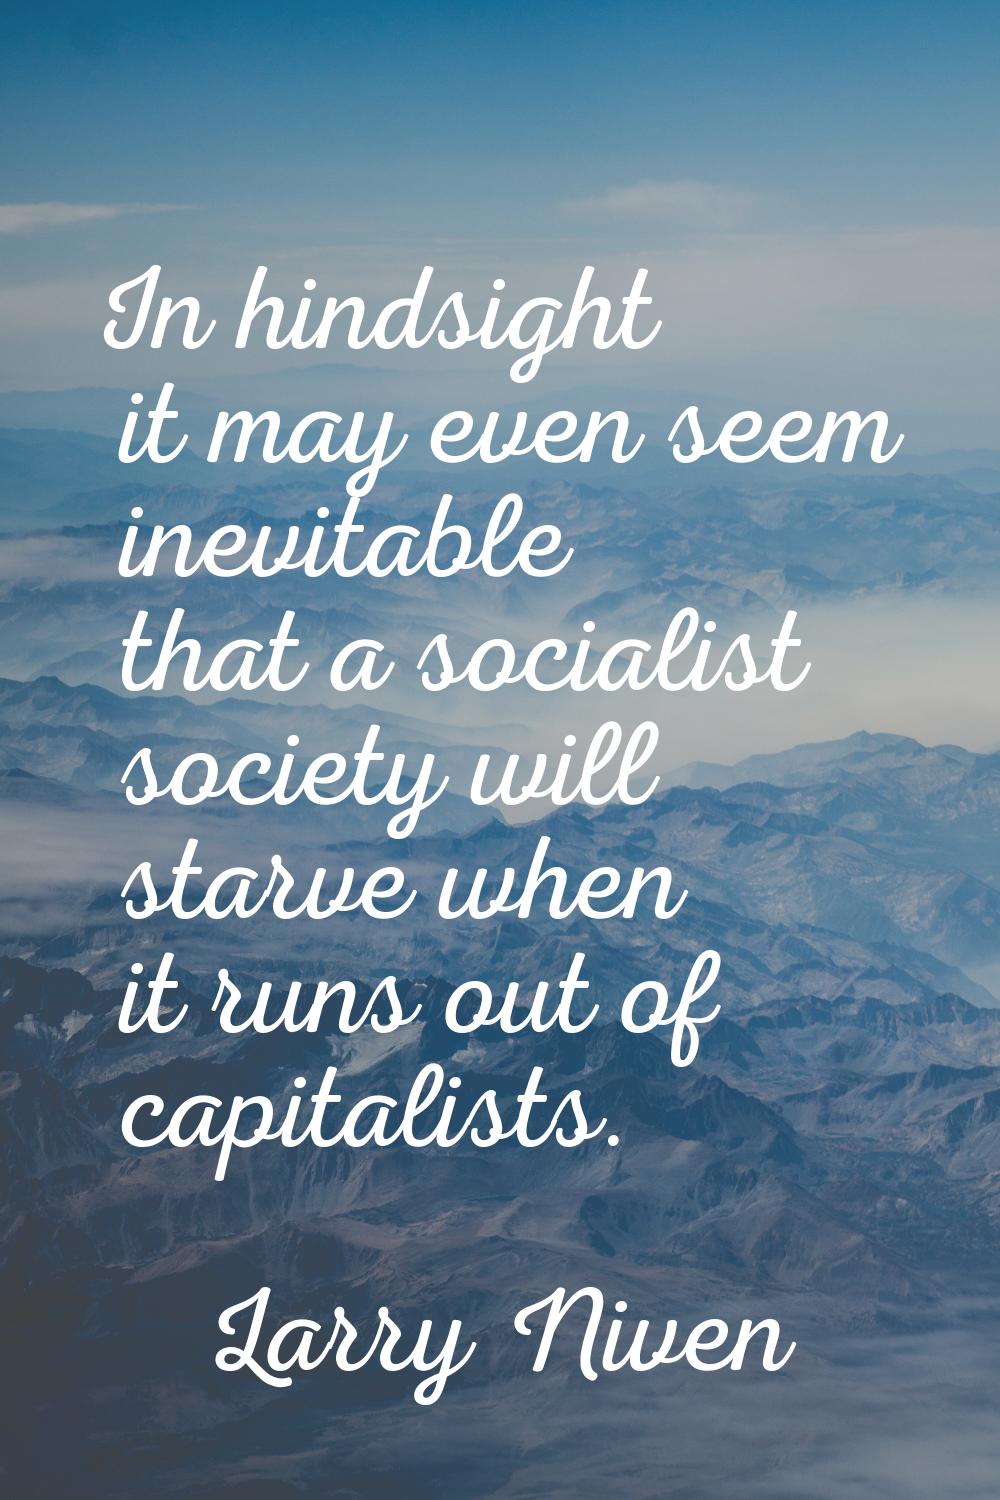 In hindsight it may even seem inevitable that a socialist society will starve when it runs out of c